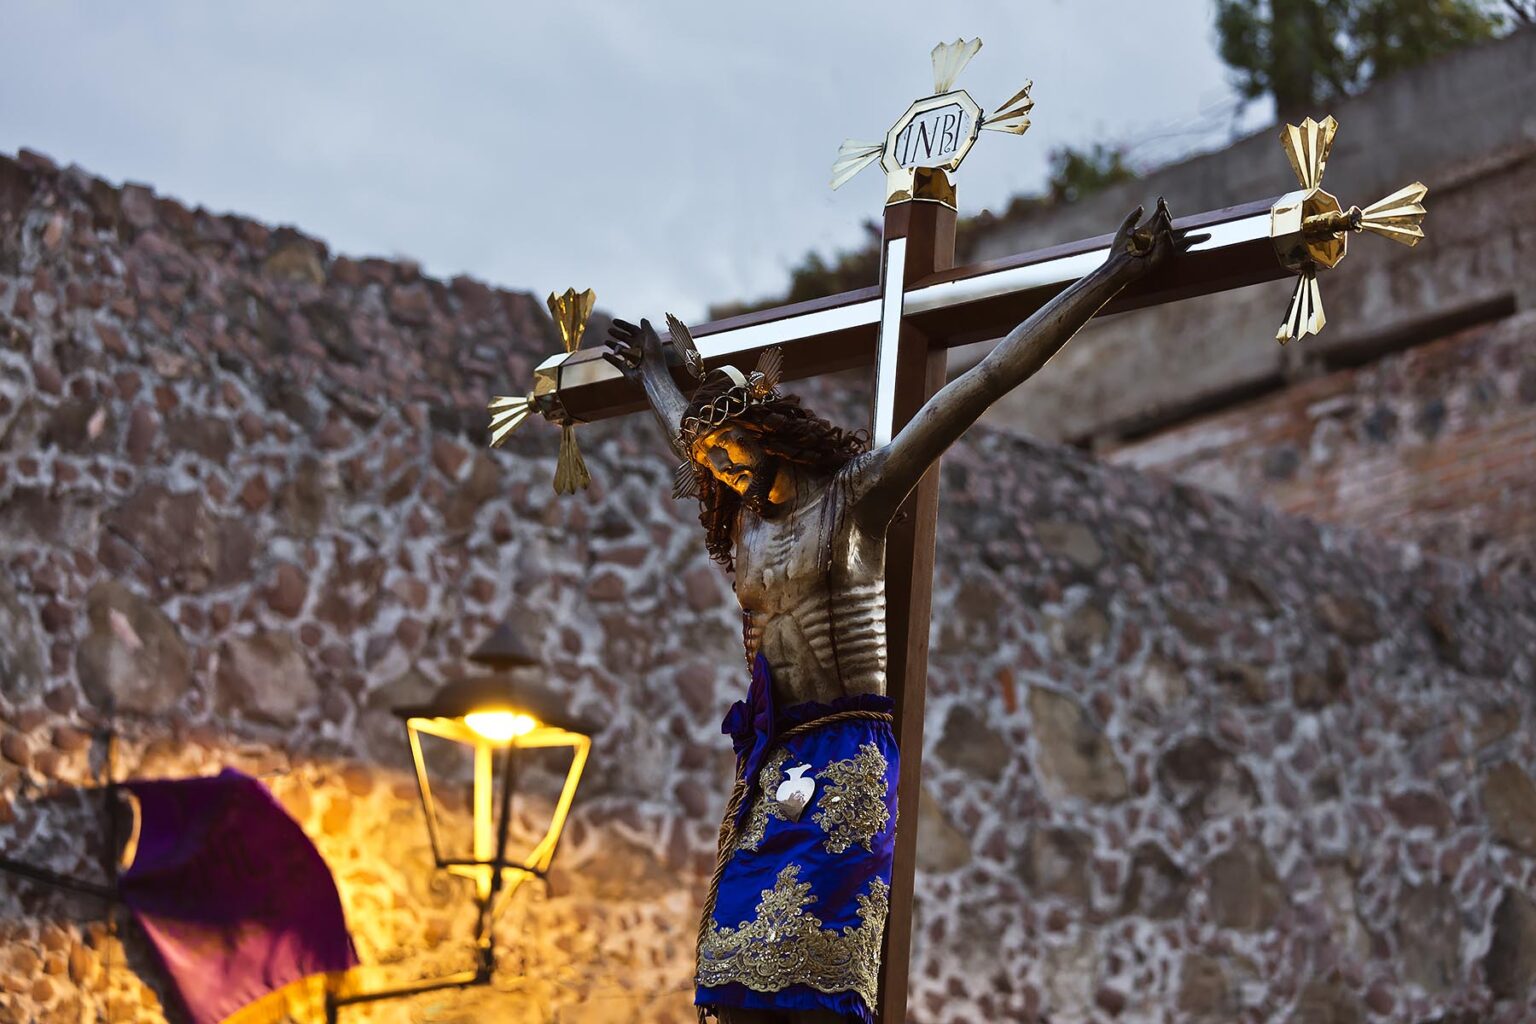 A statue of JESUS ON THE CROSS is carried in the Good Friday Procession, known as the Santo Entierro, from the ORATORIO CHURCH - SAN MIGUEL DE ALLENDE, MEXICO